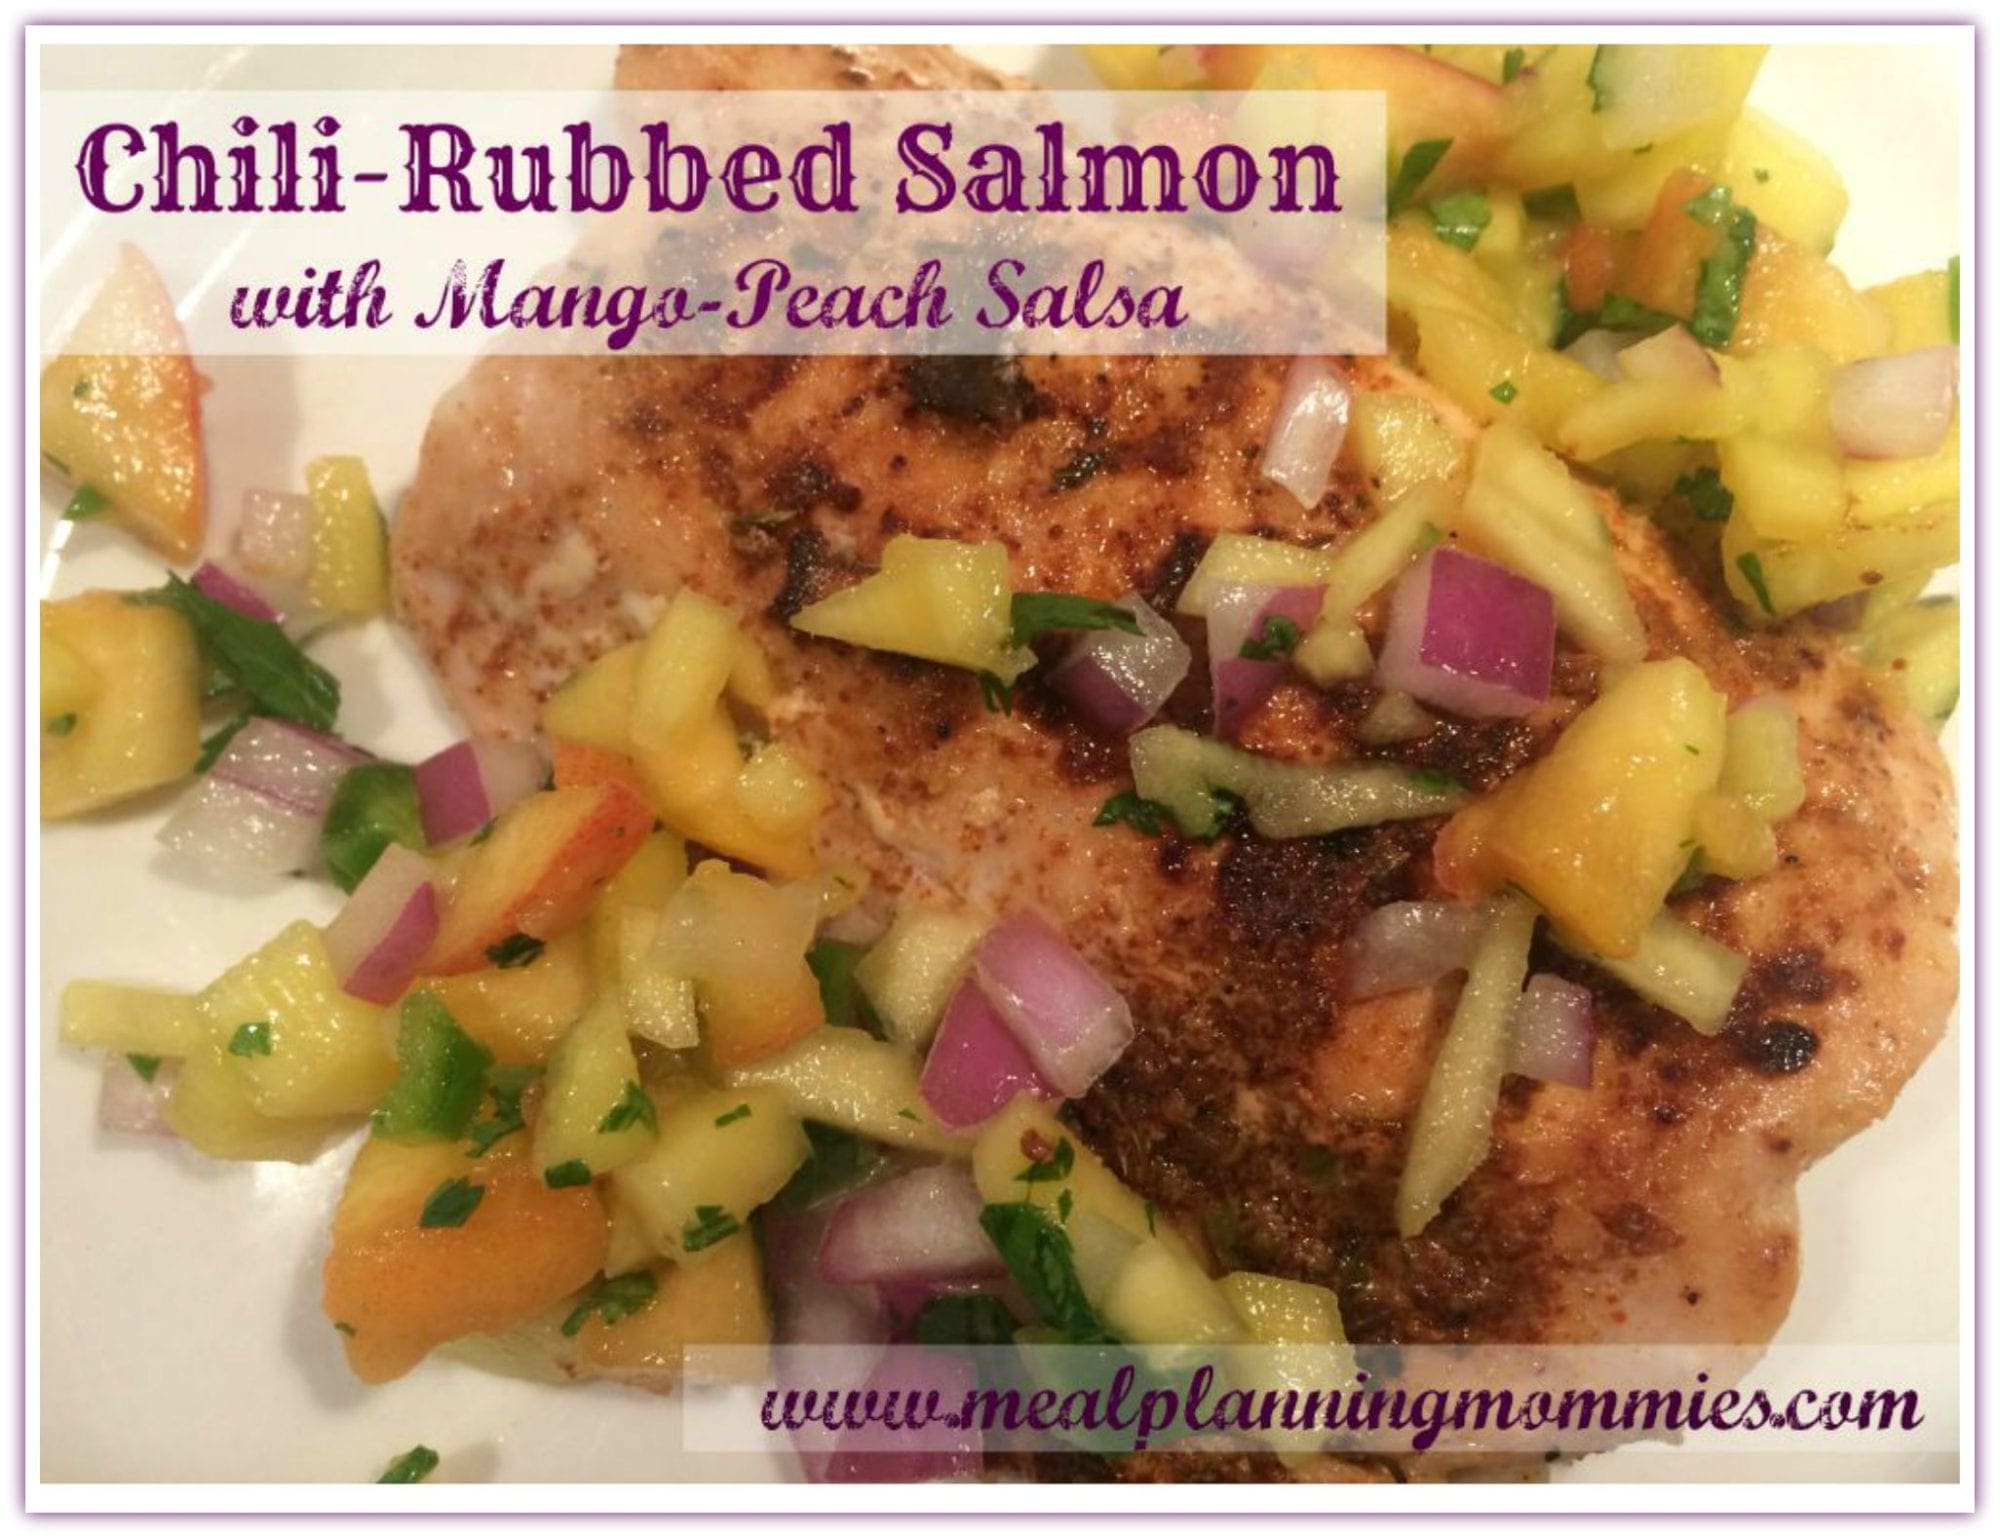 chili-rubbed salmon with mango peach salsa- Meal Planning Mommies